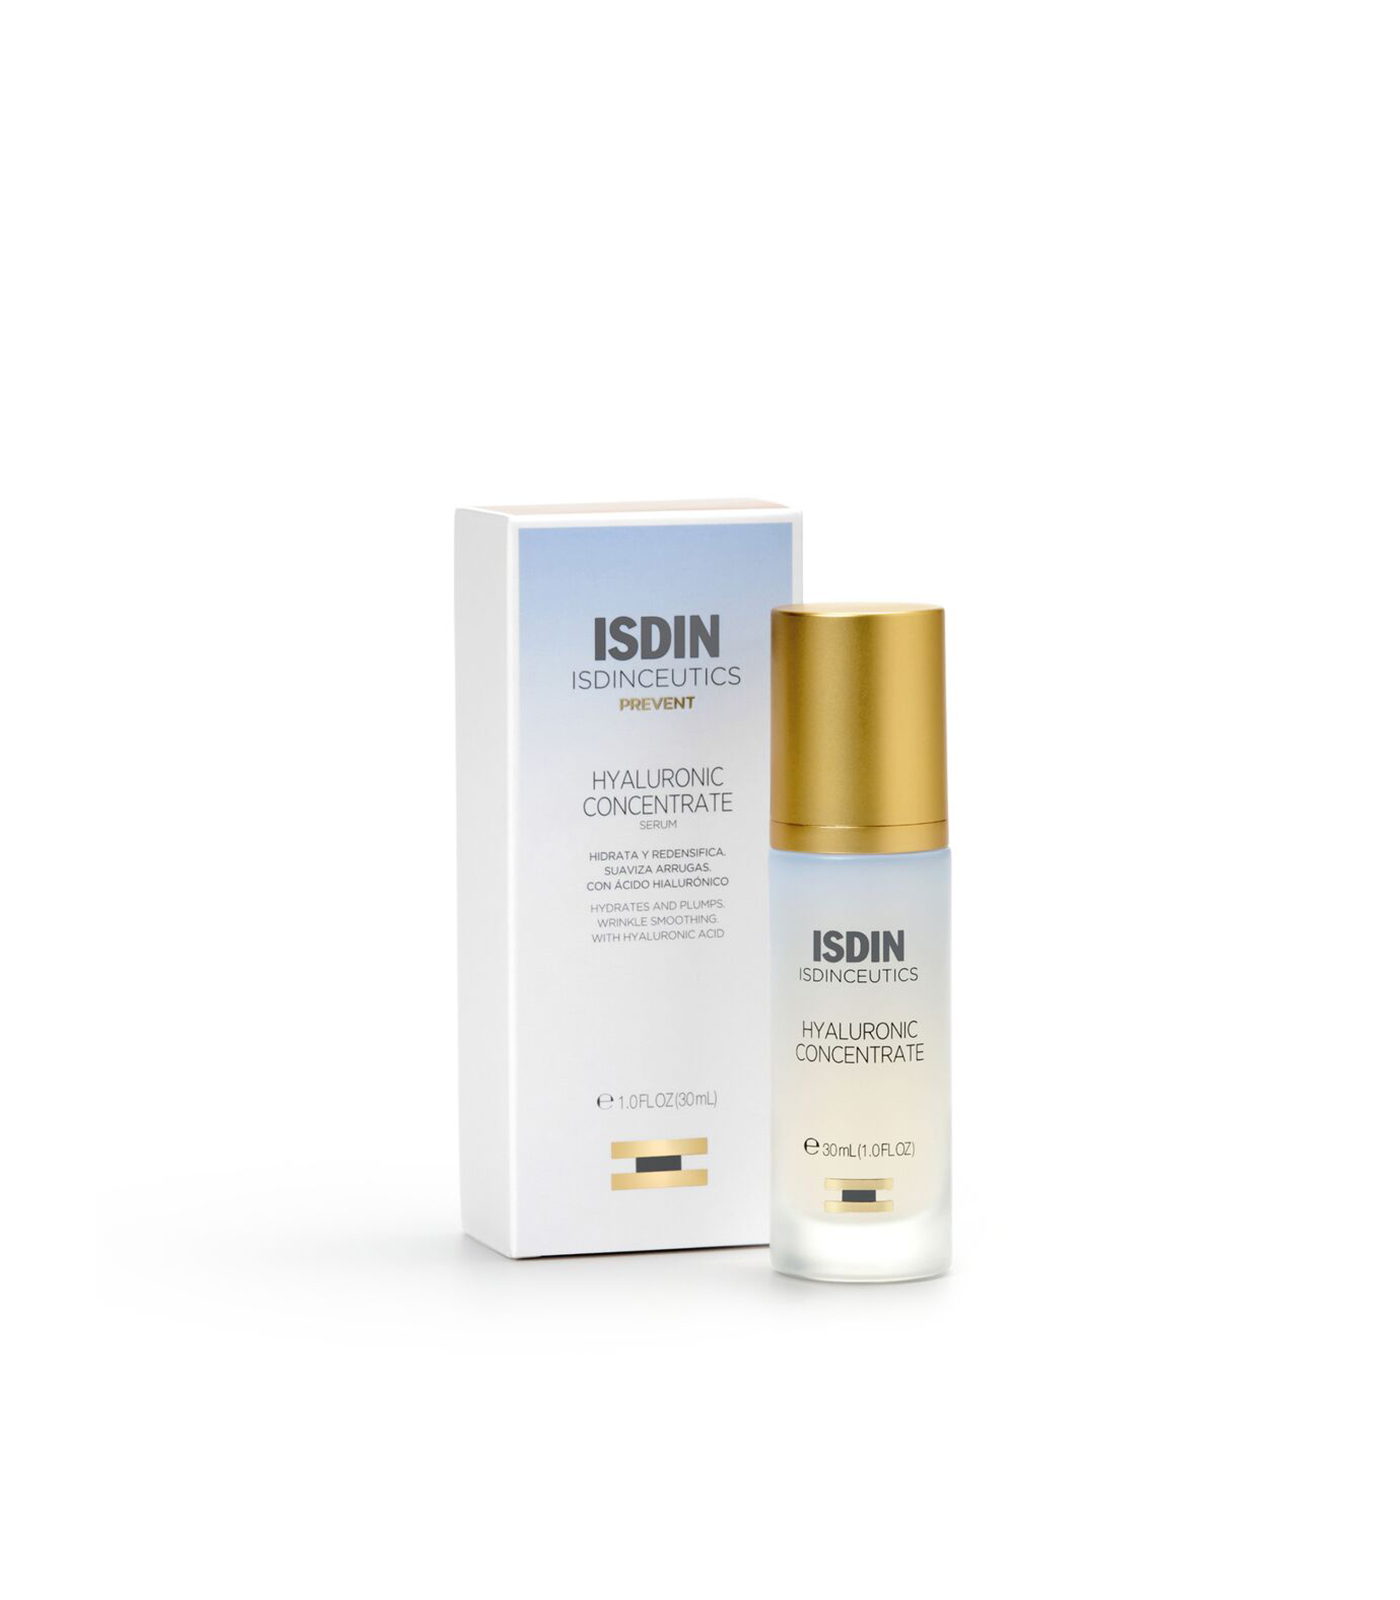 Hyaluronic Concentrate, de Isdin